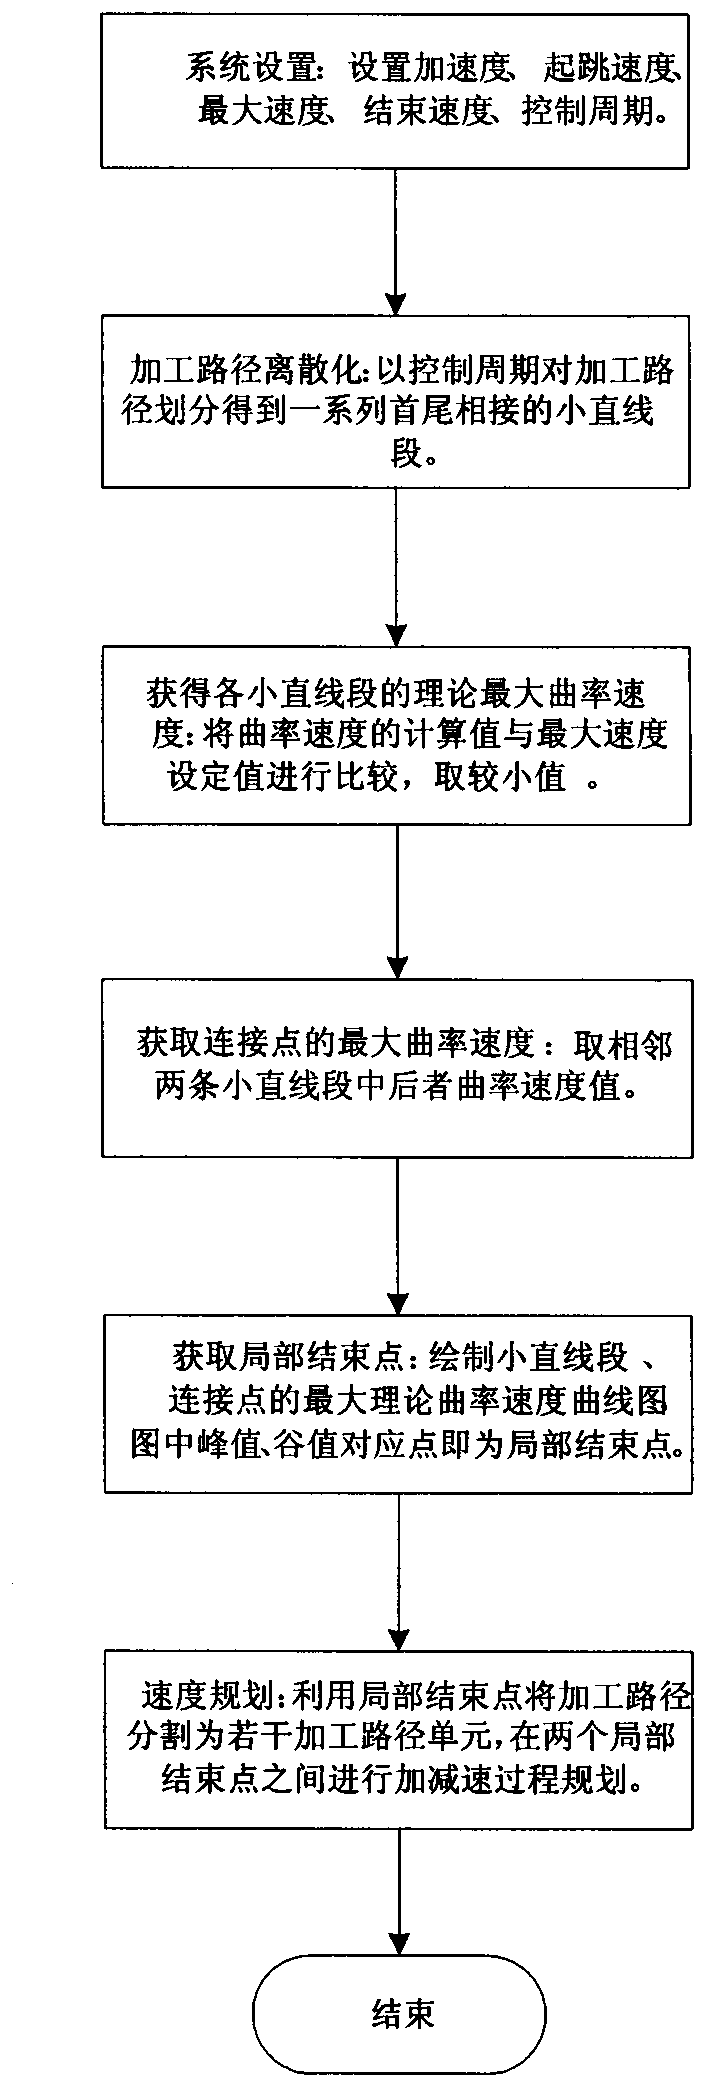 Speed control method for numerical control system in consideration of small line segment and connection point speed